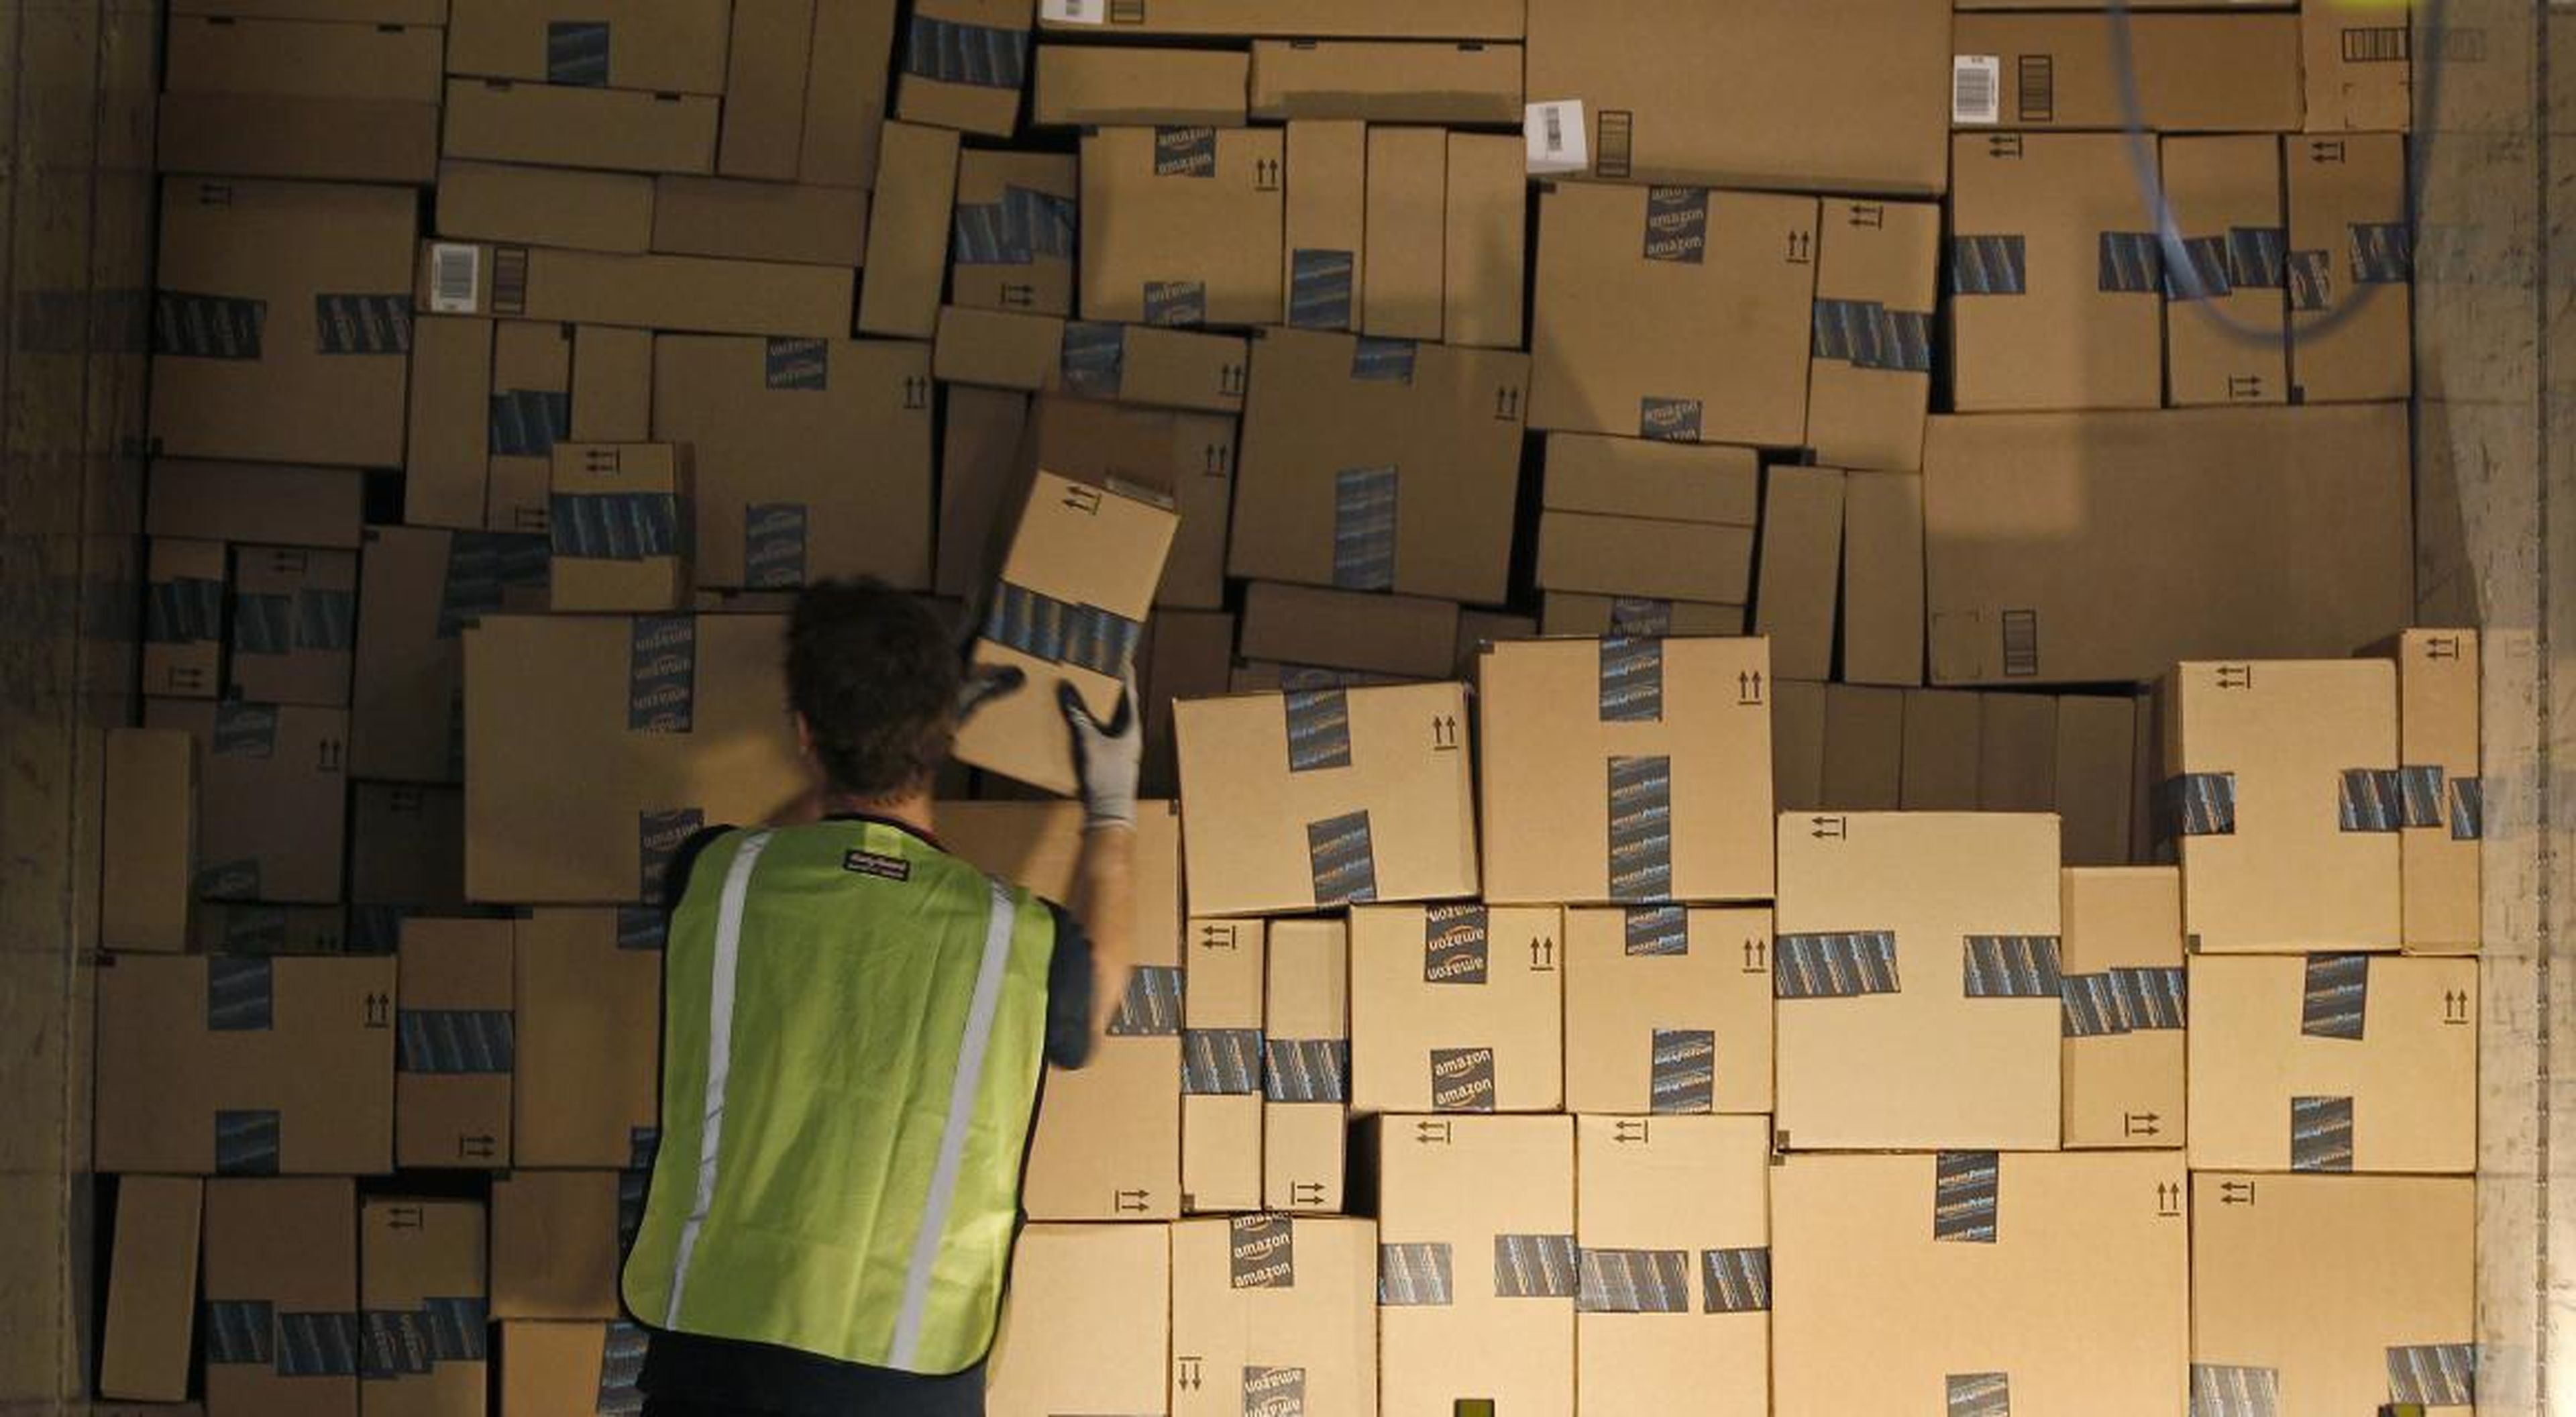 Working conditions in Amazon's fulfillment centers have long been notoriously bad and there are some hilarious stories about unhappy workers "rebelling."